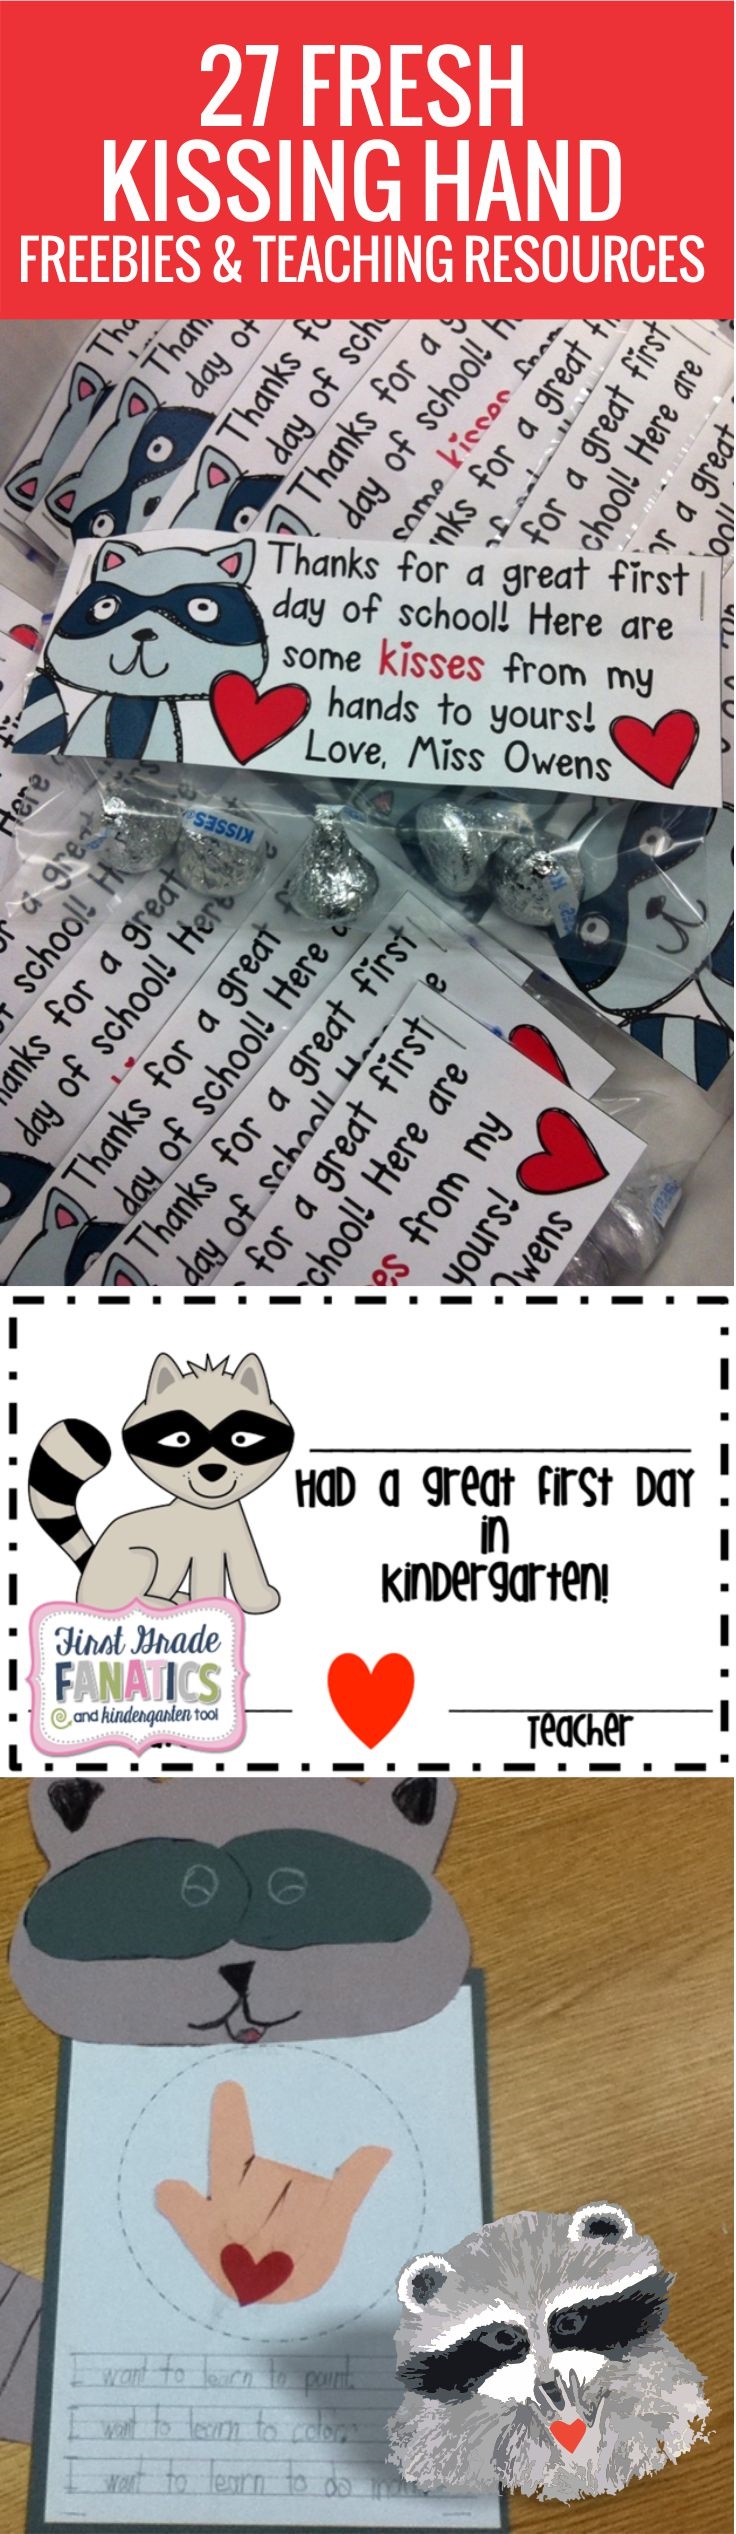 27 Kissing Hand Freebies and Teaching Resources